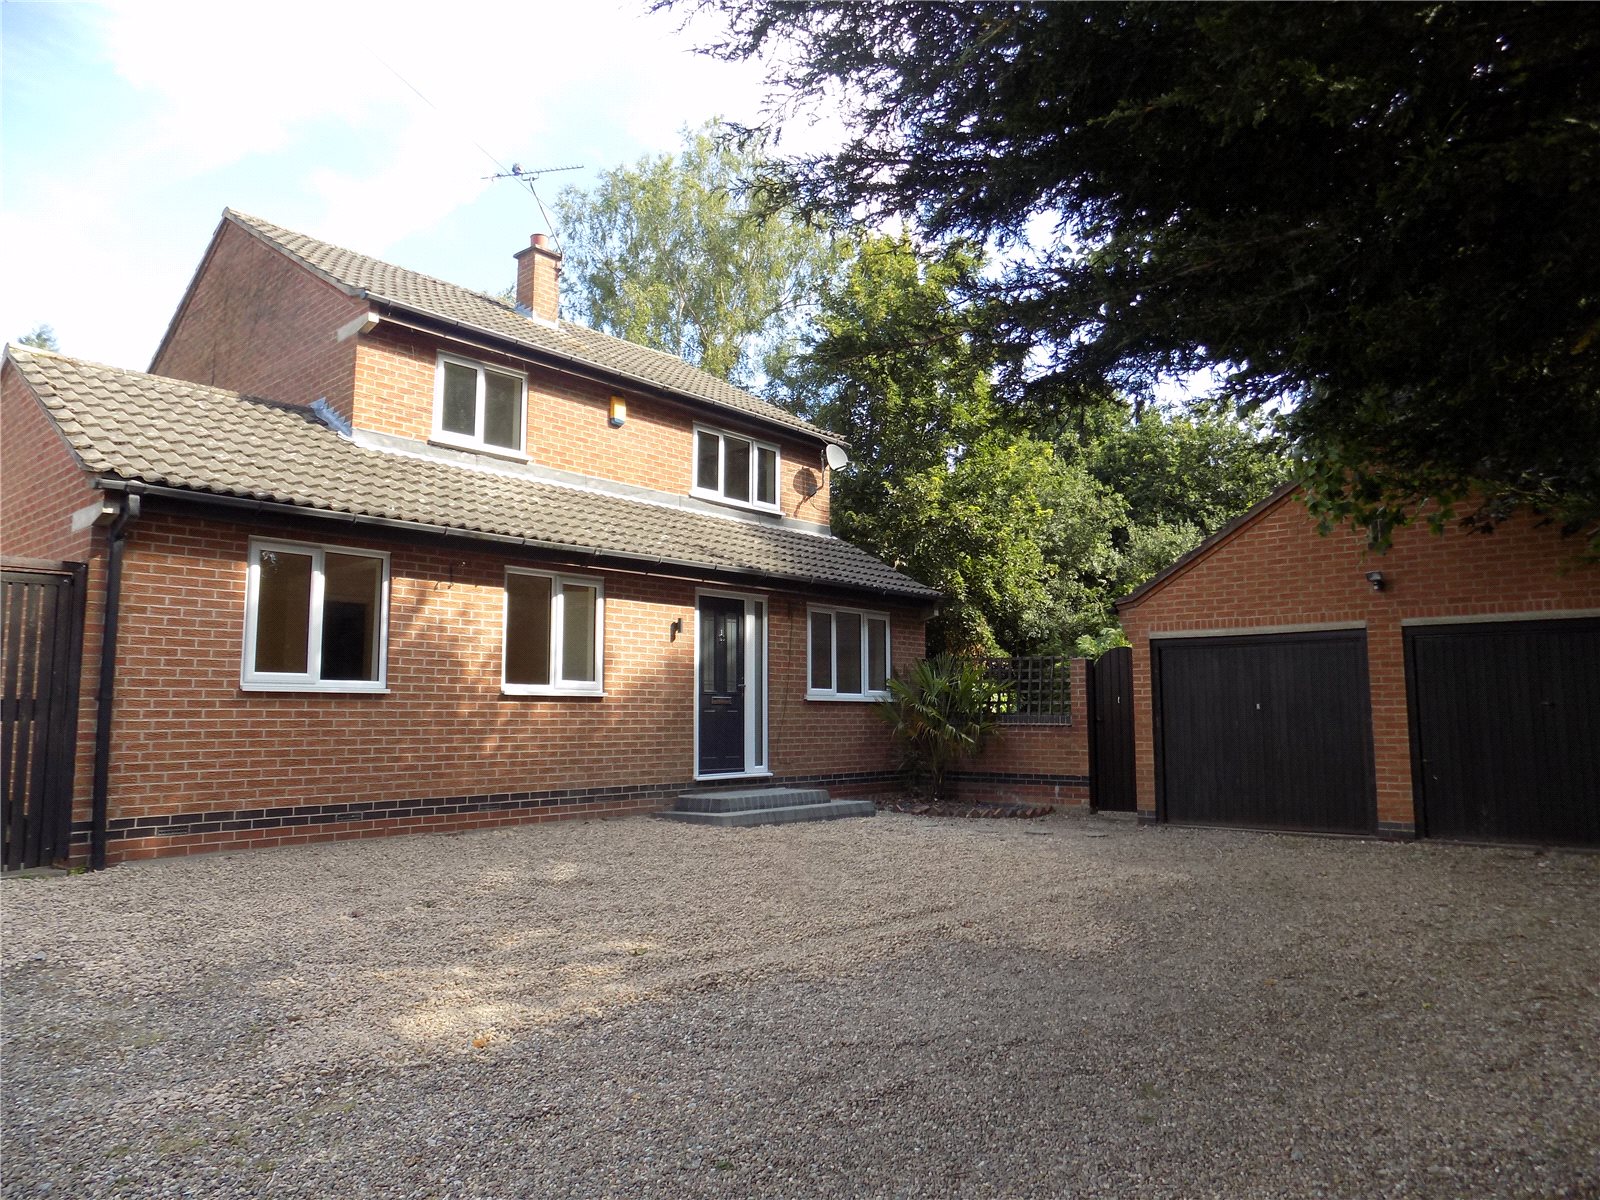 Whitegates Heanor 4 bedroom House For Sale in Coppice Court Roper ...